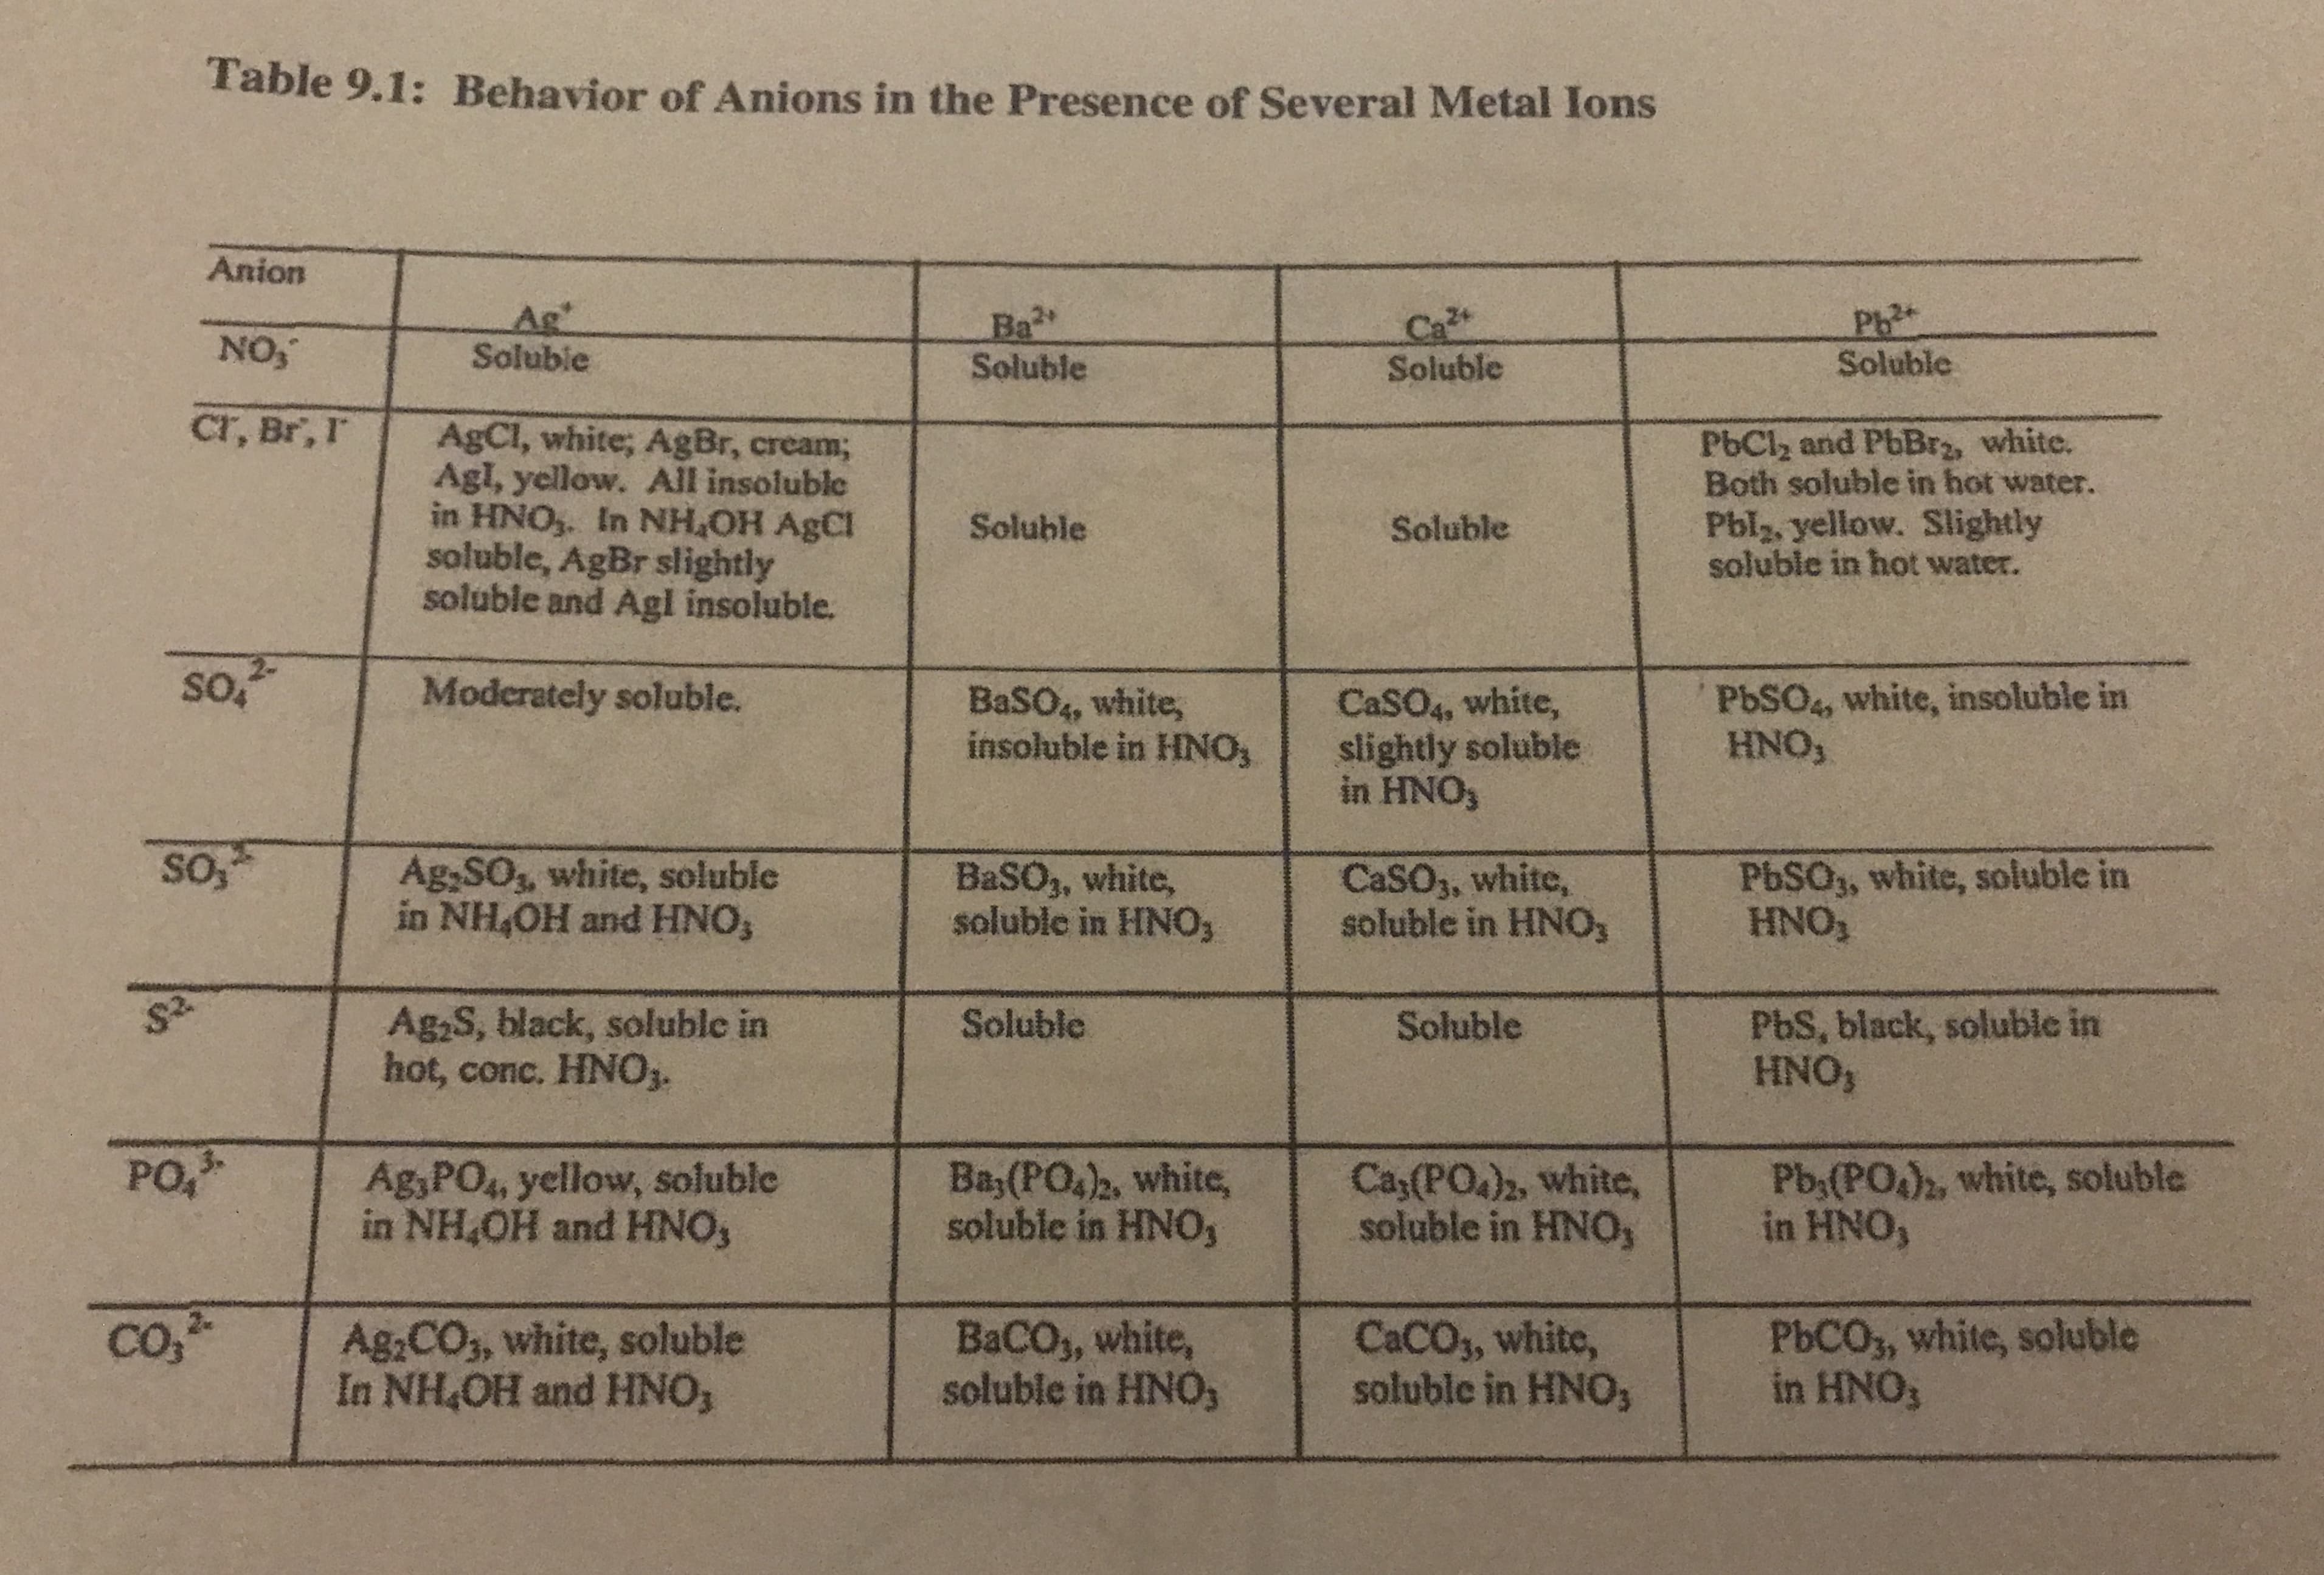 Table 9.1: Behavior of Anions in the Presence of Several Metal Ions
Anion
Ag
Solubie
Ba"
Soluble
Ca
Soluble
Ph3
Soluble
NO,
cr, Br, I
AgCl, white; AgBr, cream;
Agl, yellow. All insoluble
in HNO,. In NH,OH AgCl
soluble, AgBr slightly
soluble and Agl insoluble.
PbCl2 and PbBr, white.
Both soluble in hot water.
Pblz, yellow. Slightly
soluble in hot water.
Soluble
Soluble
so,
Moderately soluble.
BasO, white,
insoluble in HNO
CaSO4, white,
slightly soluble
in HNO3
PbSO4, white, insoluble in
HNO,
so,
Ag,SO, white, soluble
in NH,OH and HNO,
BaSO, white,
soluble in HNO3
CaSO3, white,
soluble in HNO
PbSO,, white, soluble in
HNO,
Ag,S, black, soluble in
hot, conc. HNO3.
PbS, black, soluble in
HNO,
Soluble
Soluble
PO,
Ag,PO4, yellow, soluble
in NH,OH and HNO,
Ba;(PO4)2, white,
soluble in HNO,
Ca3(PO)2, white,
soluble in HNO,
Pb;(PO)2, white, soluble
in HNO,
co,-
Ag;CO,, white, soluble
In NH,OH and HNO,
BACO, white,
soluble in HNO,
CACO, white,
soluble in HNO3
PbCO3, white, soluble
in HNO3
